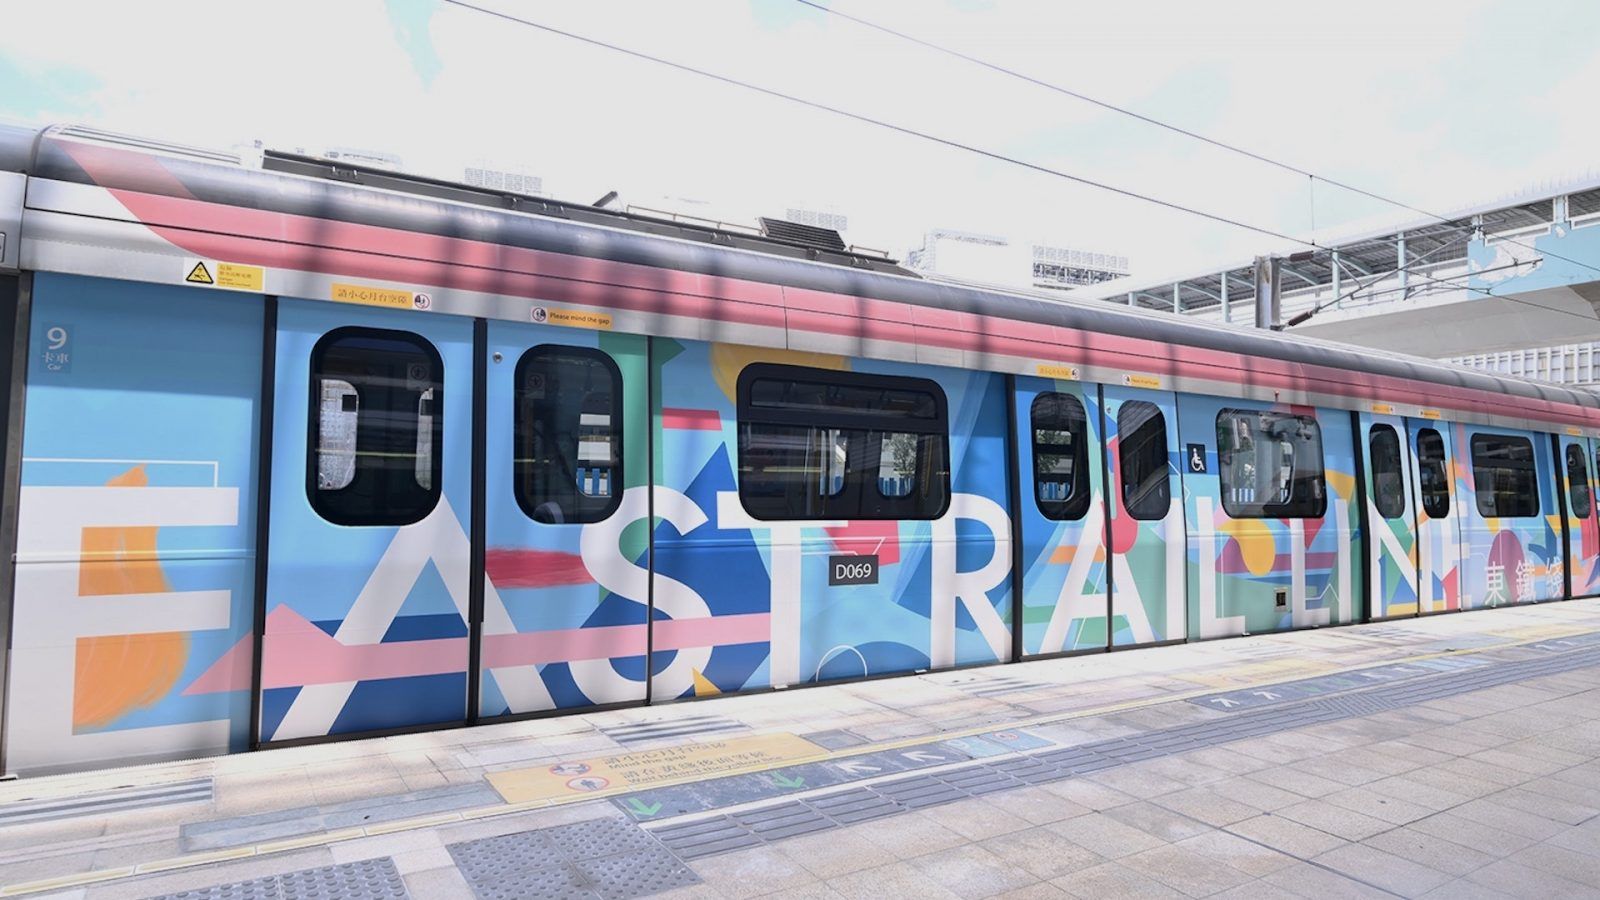 MTR’s new East Rail Line train makes your commute a little more colourful